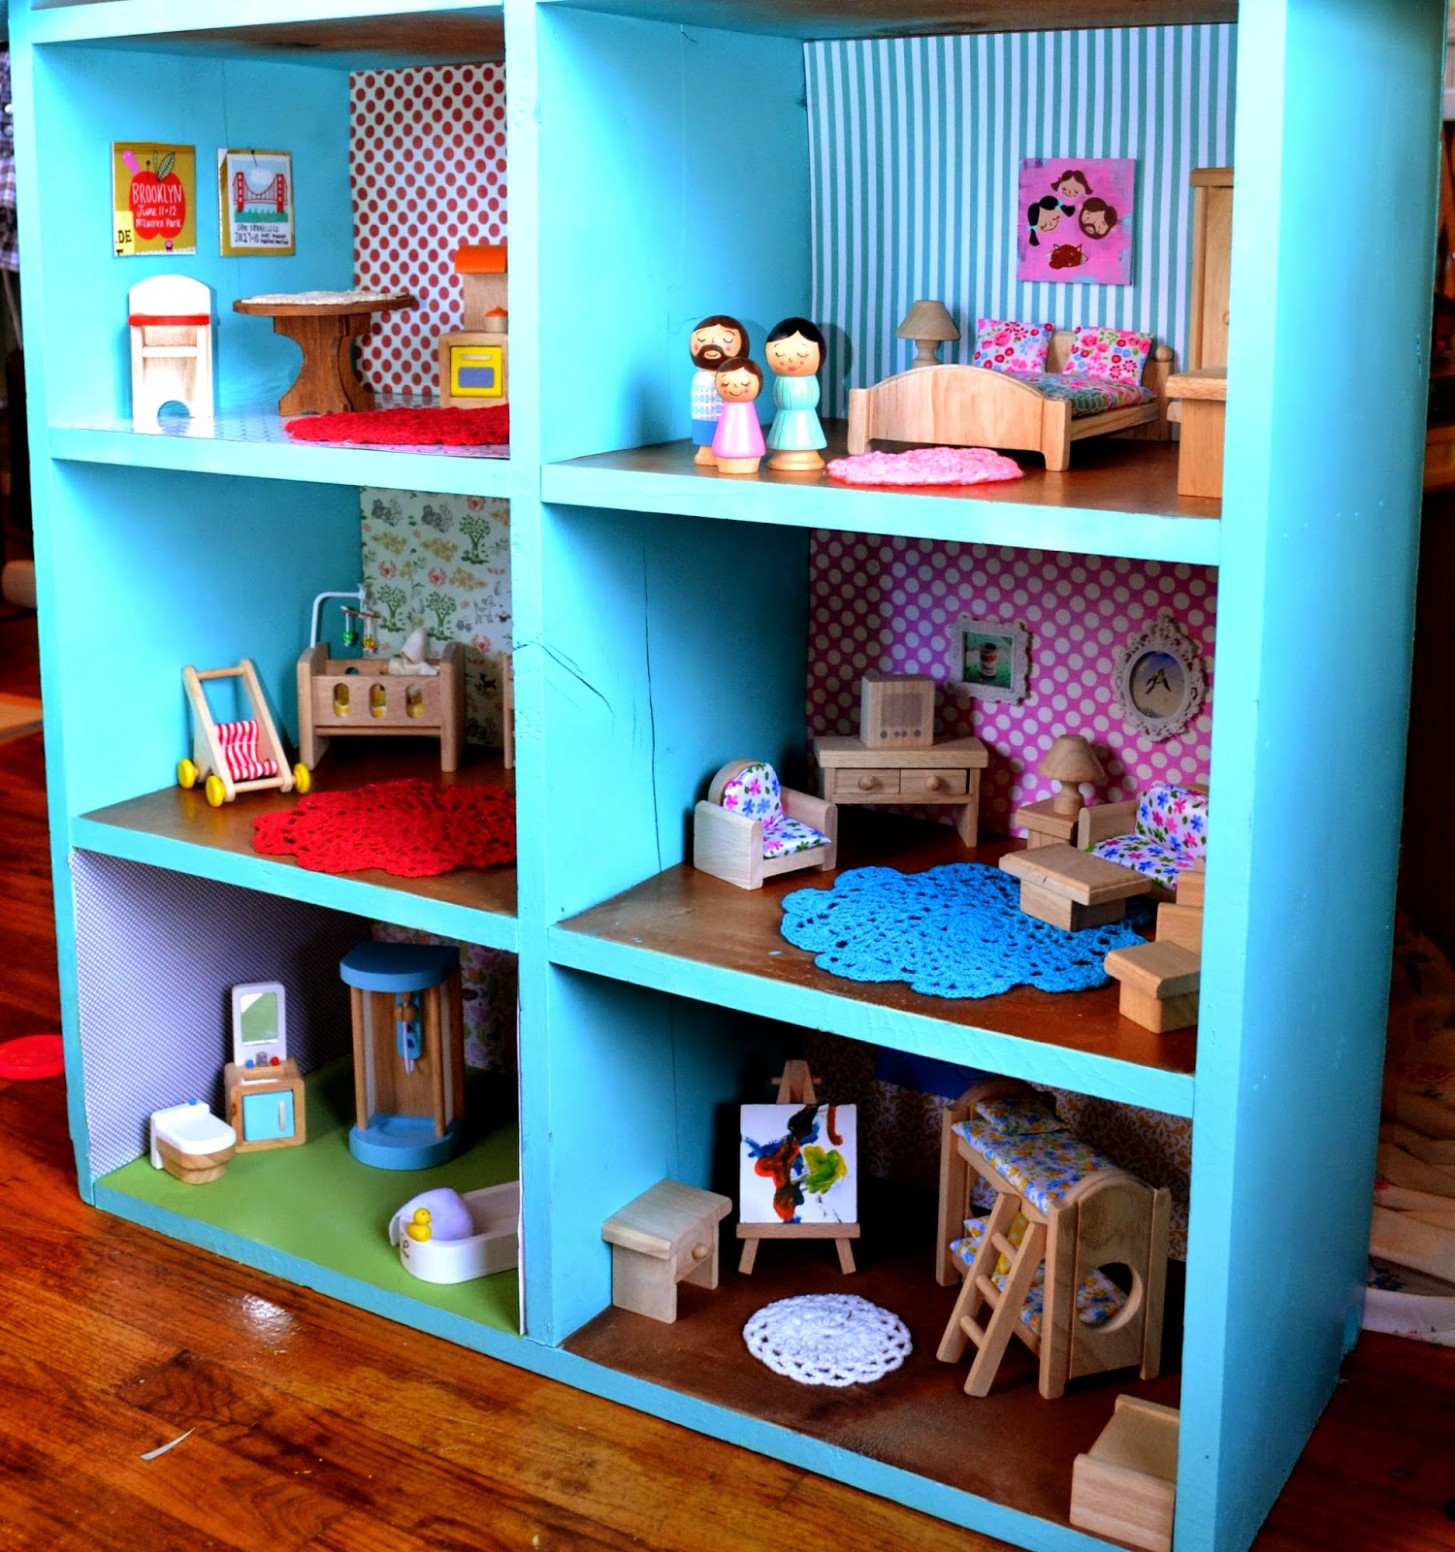 Good Times With 10 Bears Studio: Dollhouse Makeover! Does Hobby Lobby Have Dollhouse Furniture